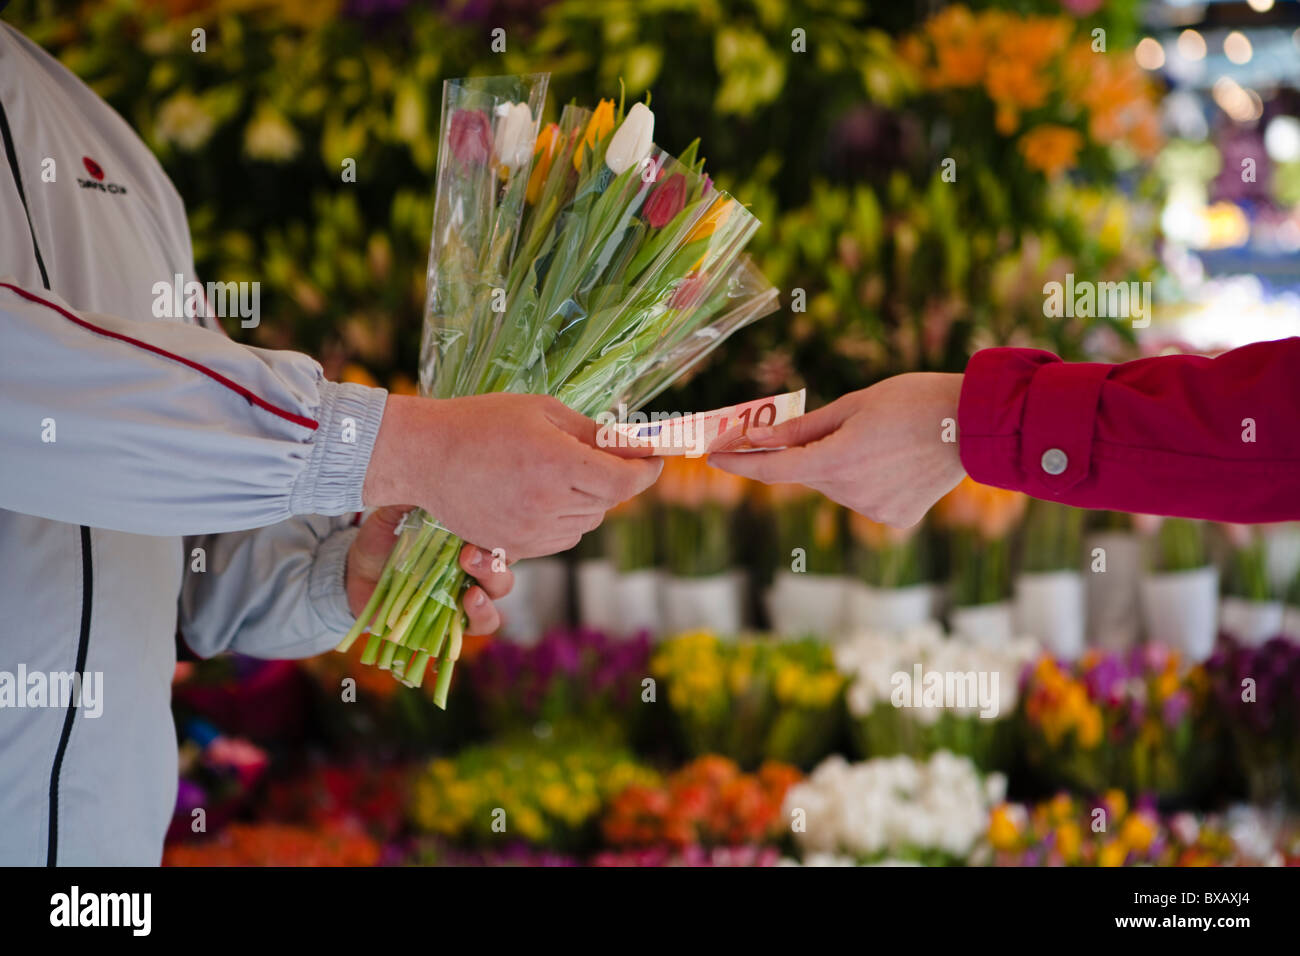 Woman paying for bunch of flowers Stock Photo